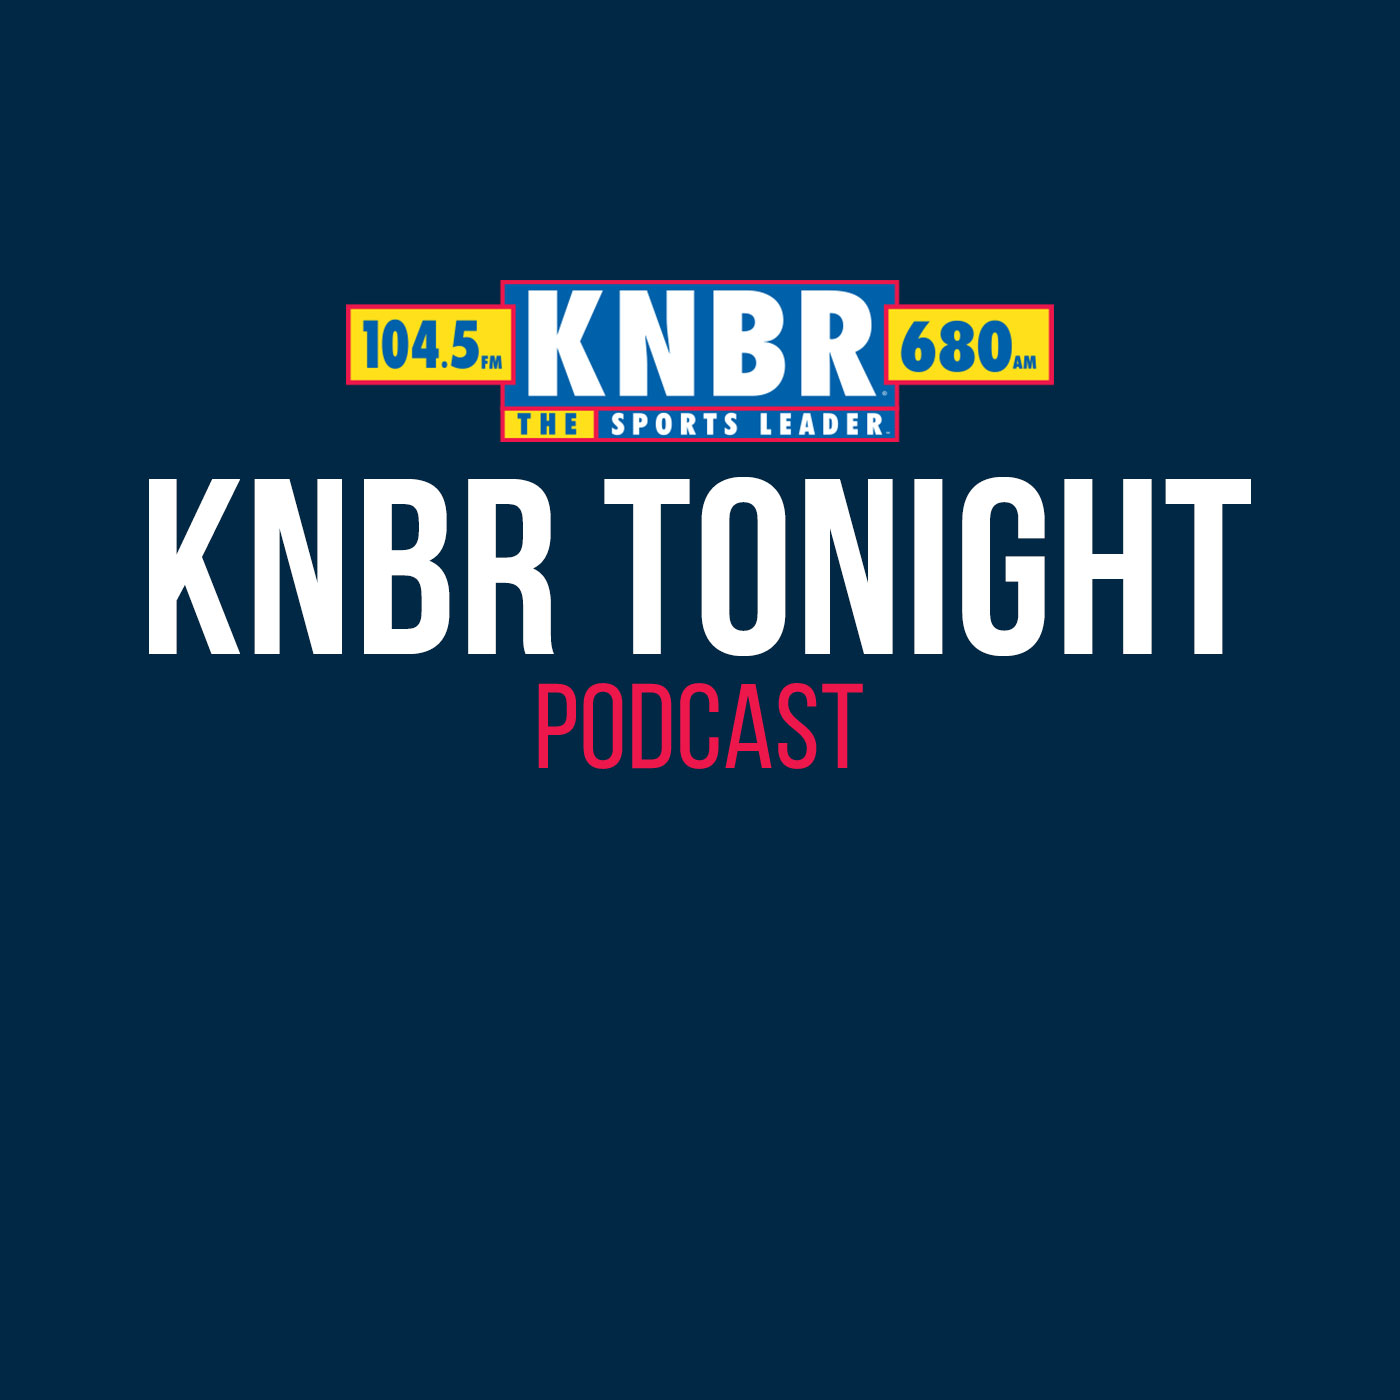 11-3 Jennifer Lee Chan joins KNBR Tonight with Kerry to preview week 9 vs the Cards